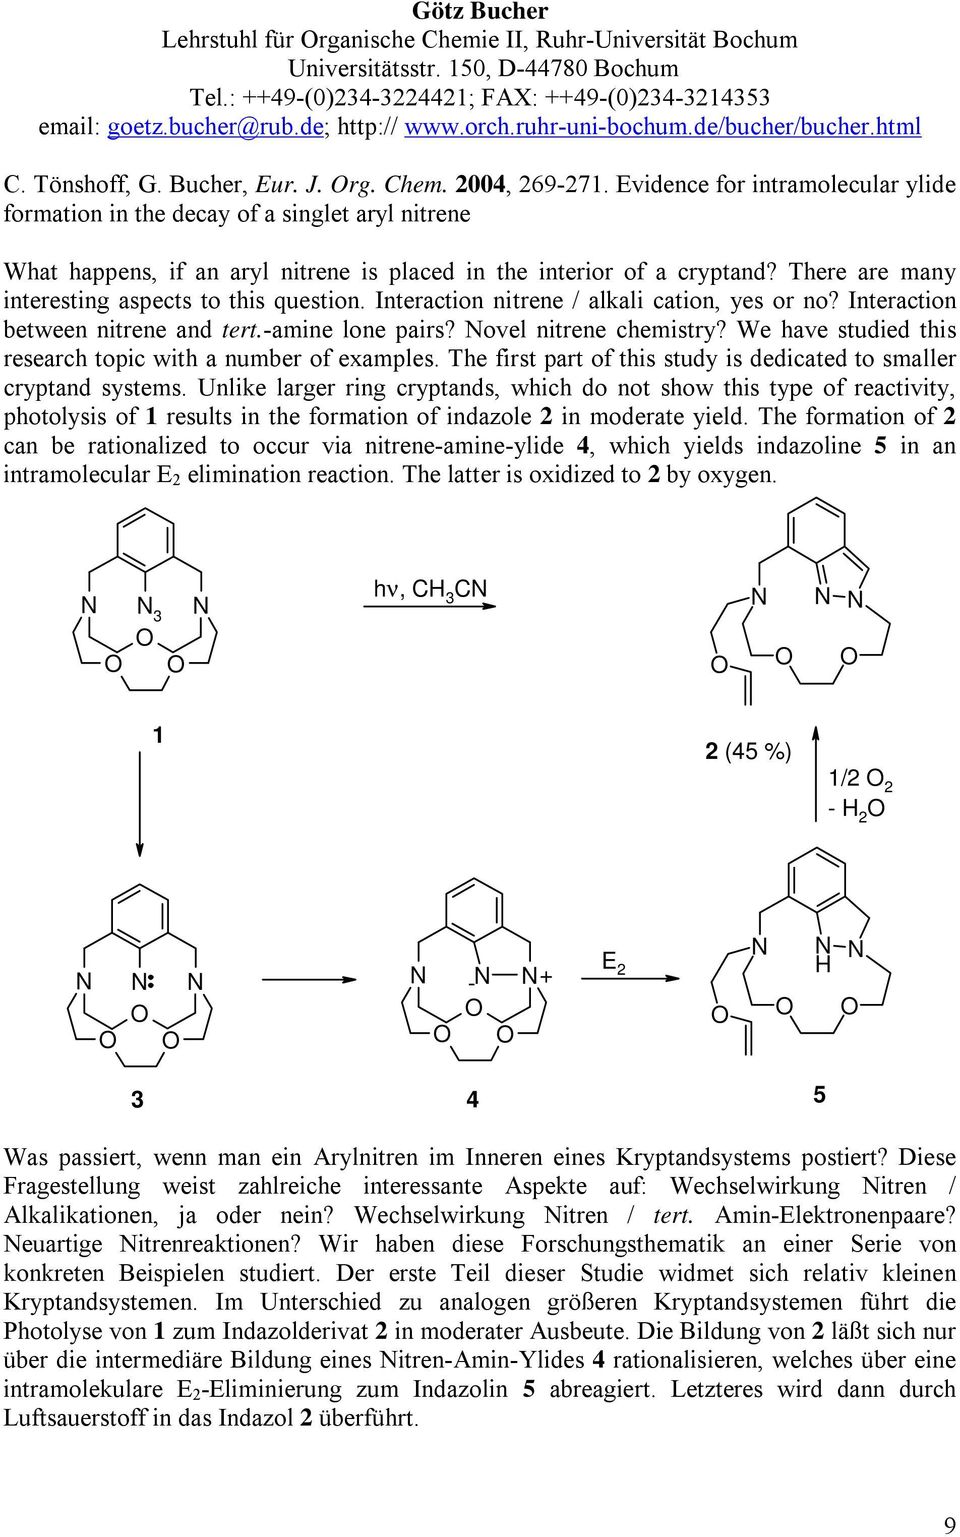 Evidence for intramolecular ylide formation in the decay of a singlet aryl nitrene What happens, if an aryl nitrene is placed in the interior of a cryptand?